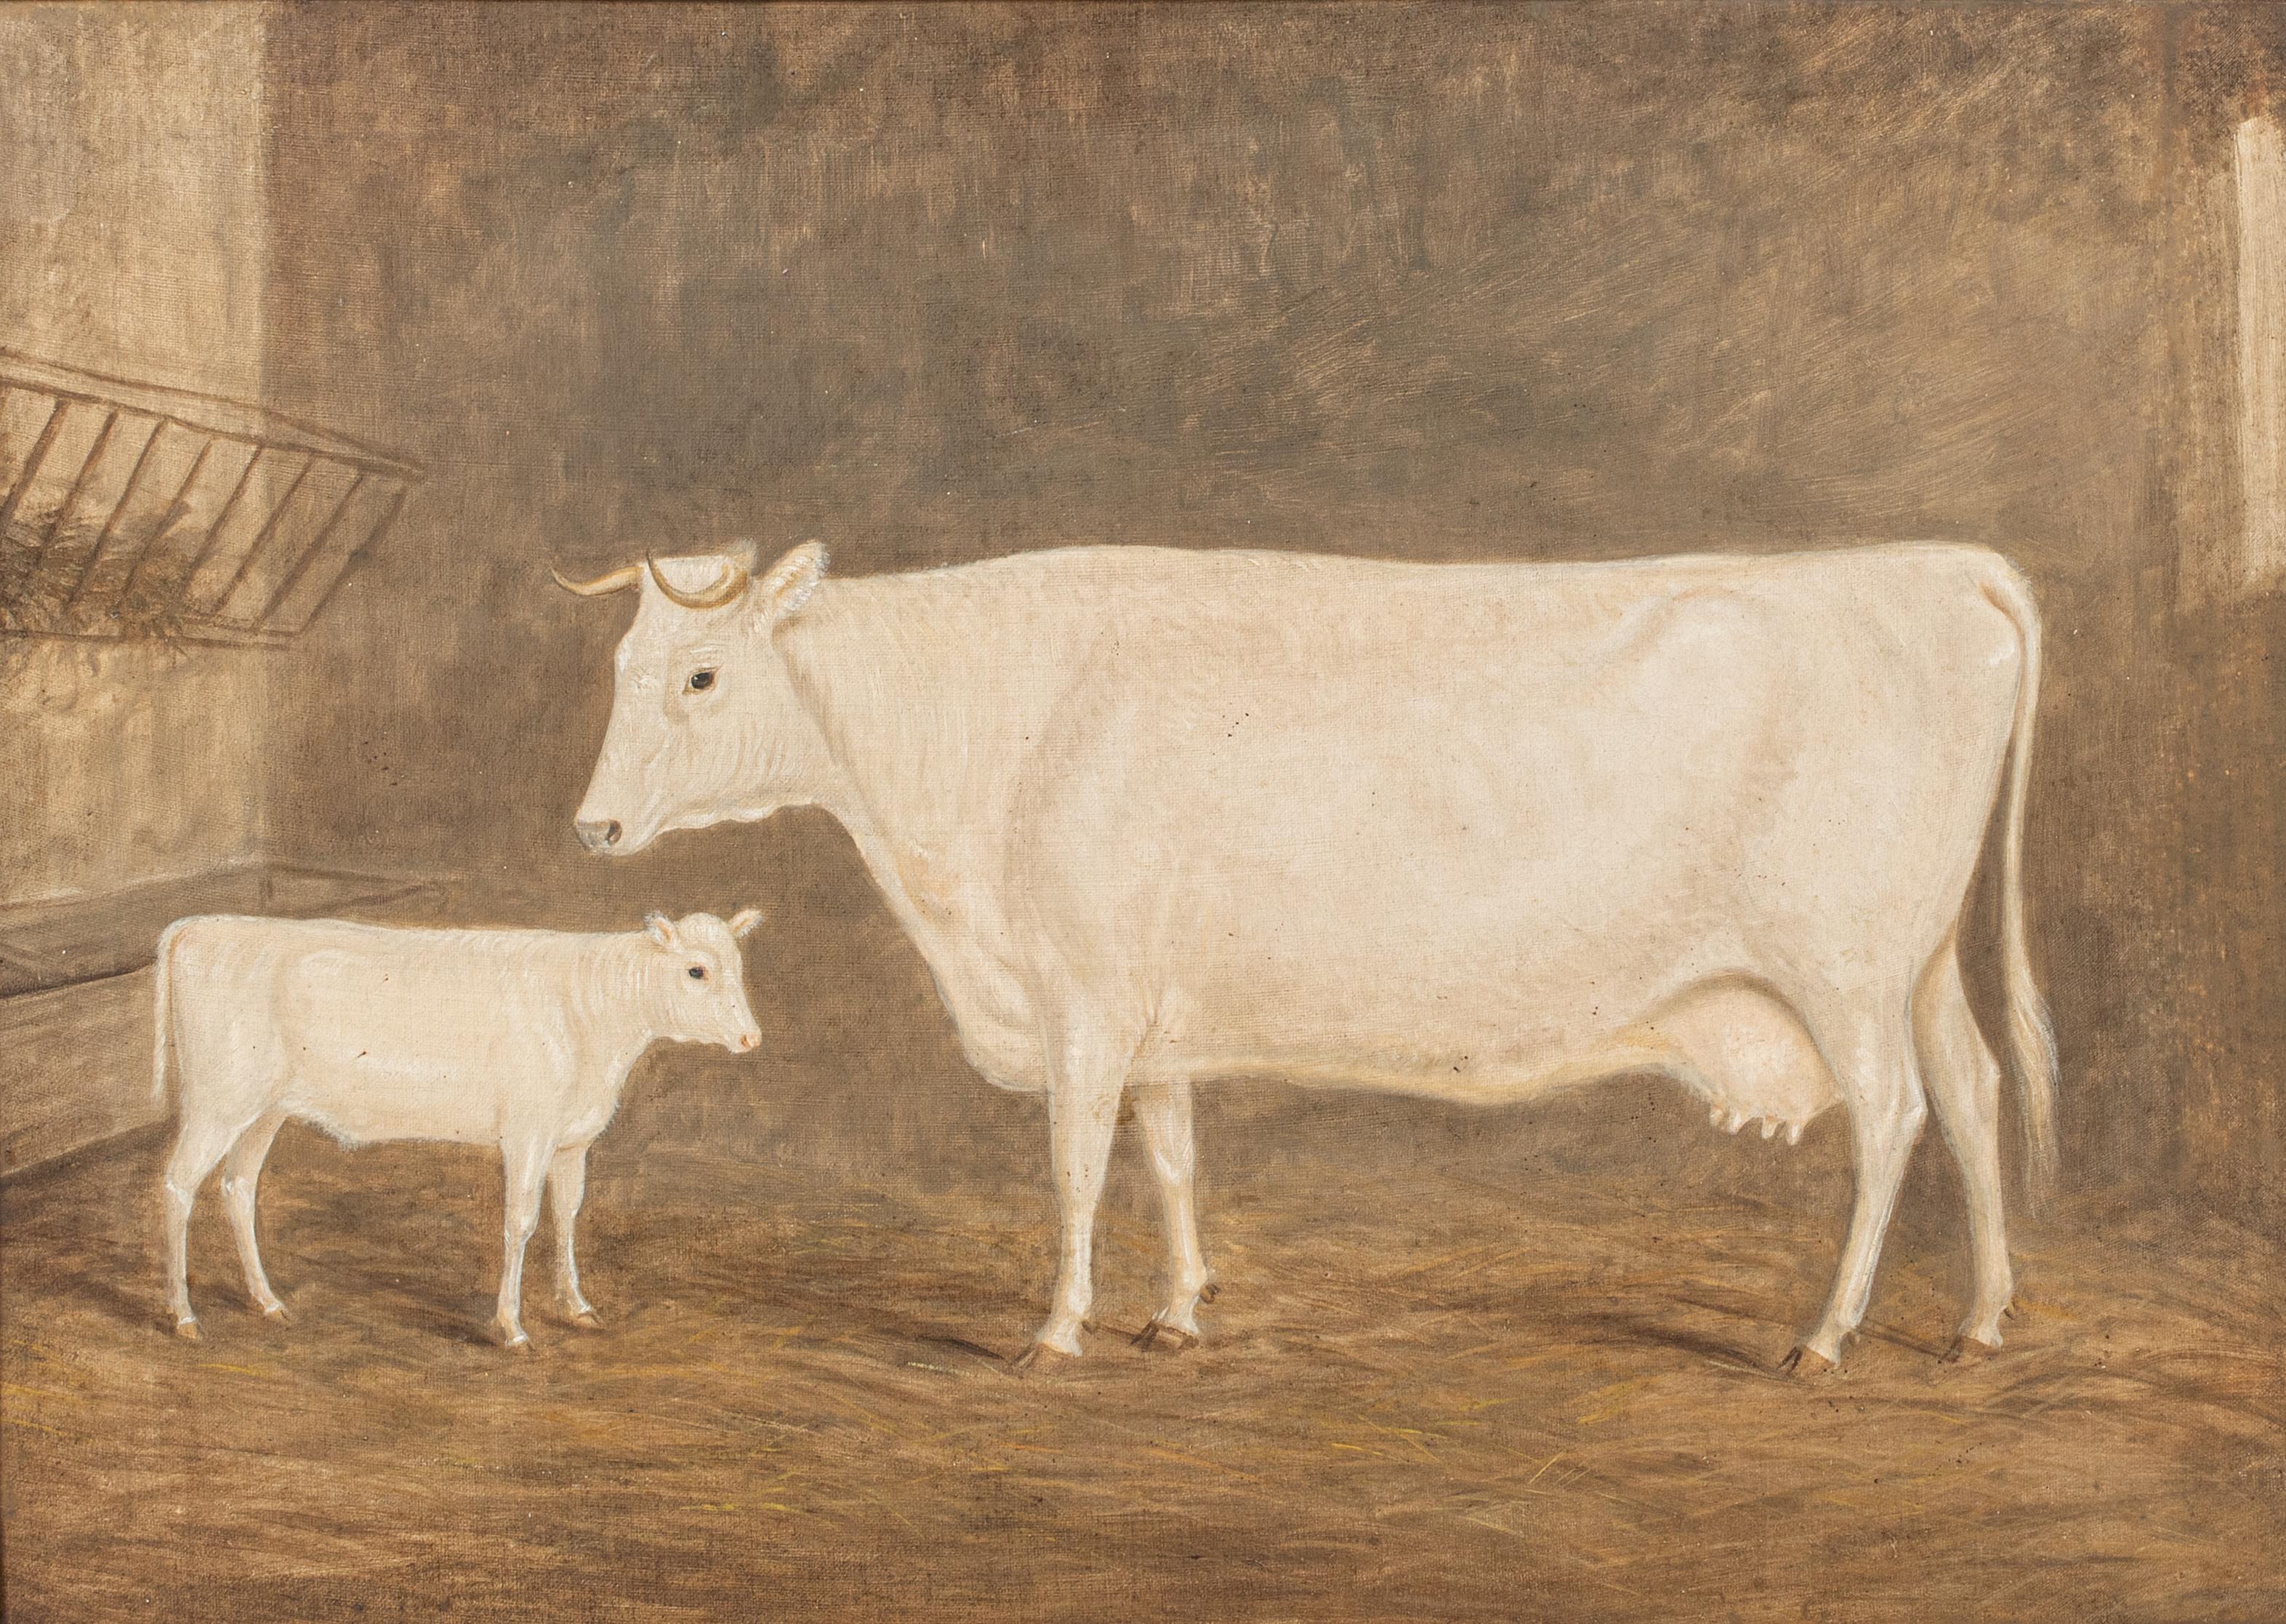 Portrait of A Prize Cow & Calf 19th Century

attributed to William Henry Davis (1783-1865)

Large 19th Century English portrait of a Prize Cow & Calf in a barn, oil on canvas attributed William Henry Davis. Excellent quality and condition early 19th